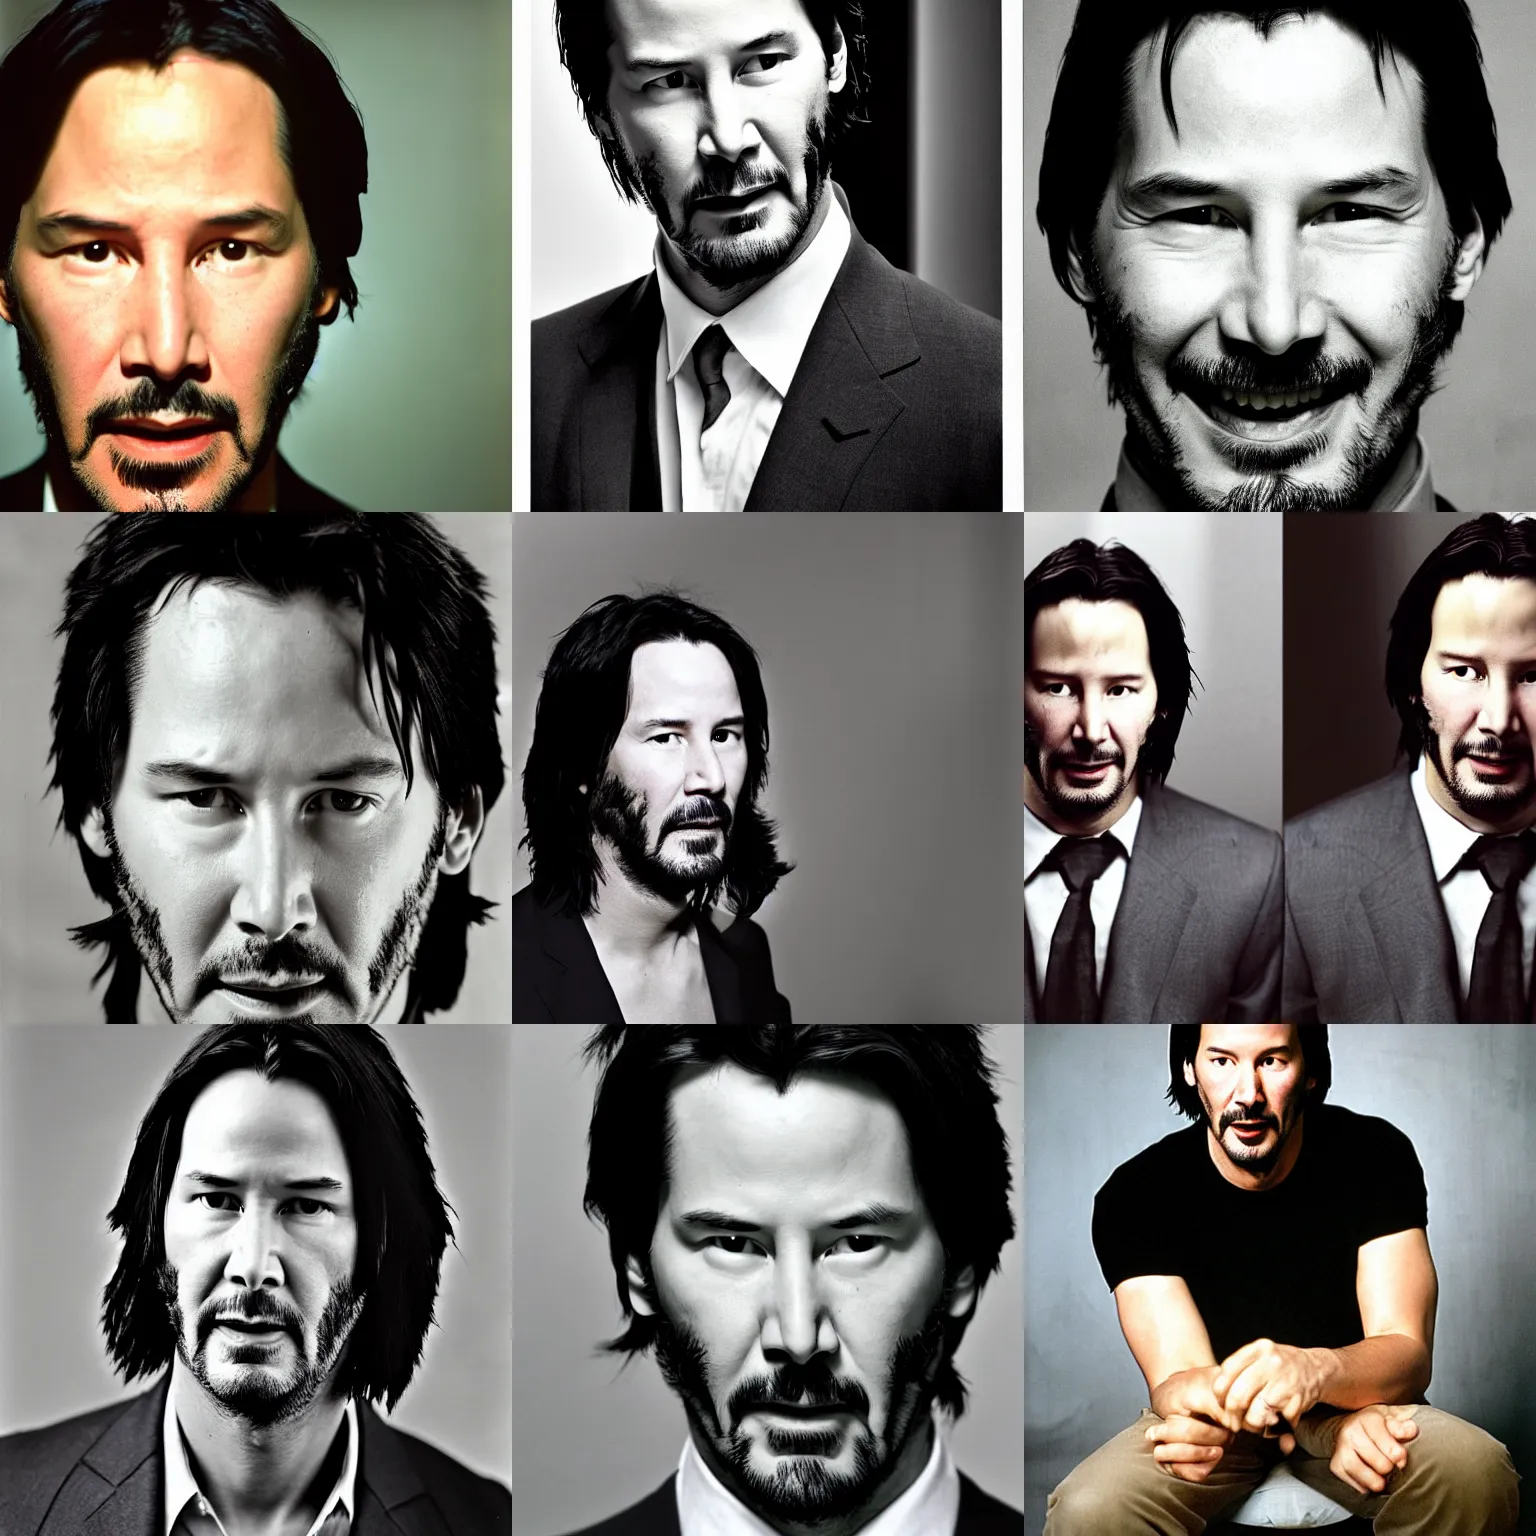 Prompt: keanu reeves, portrait photography by philippe halsman